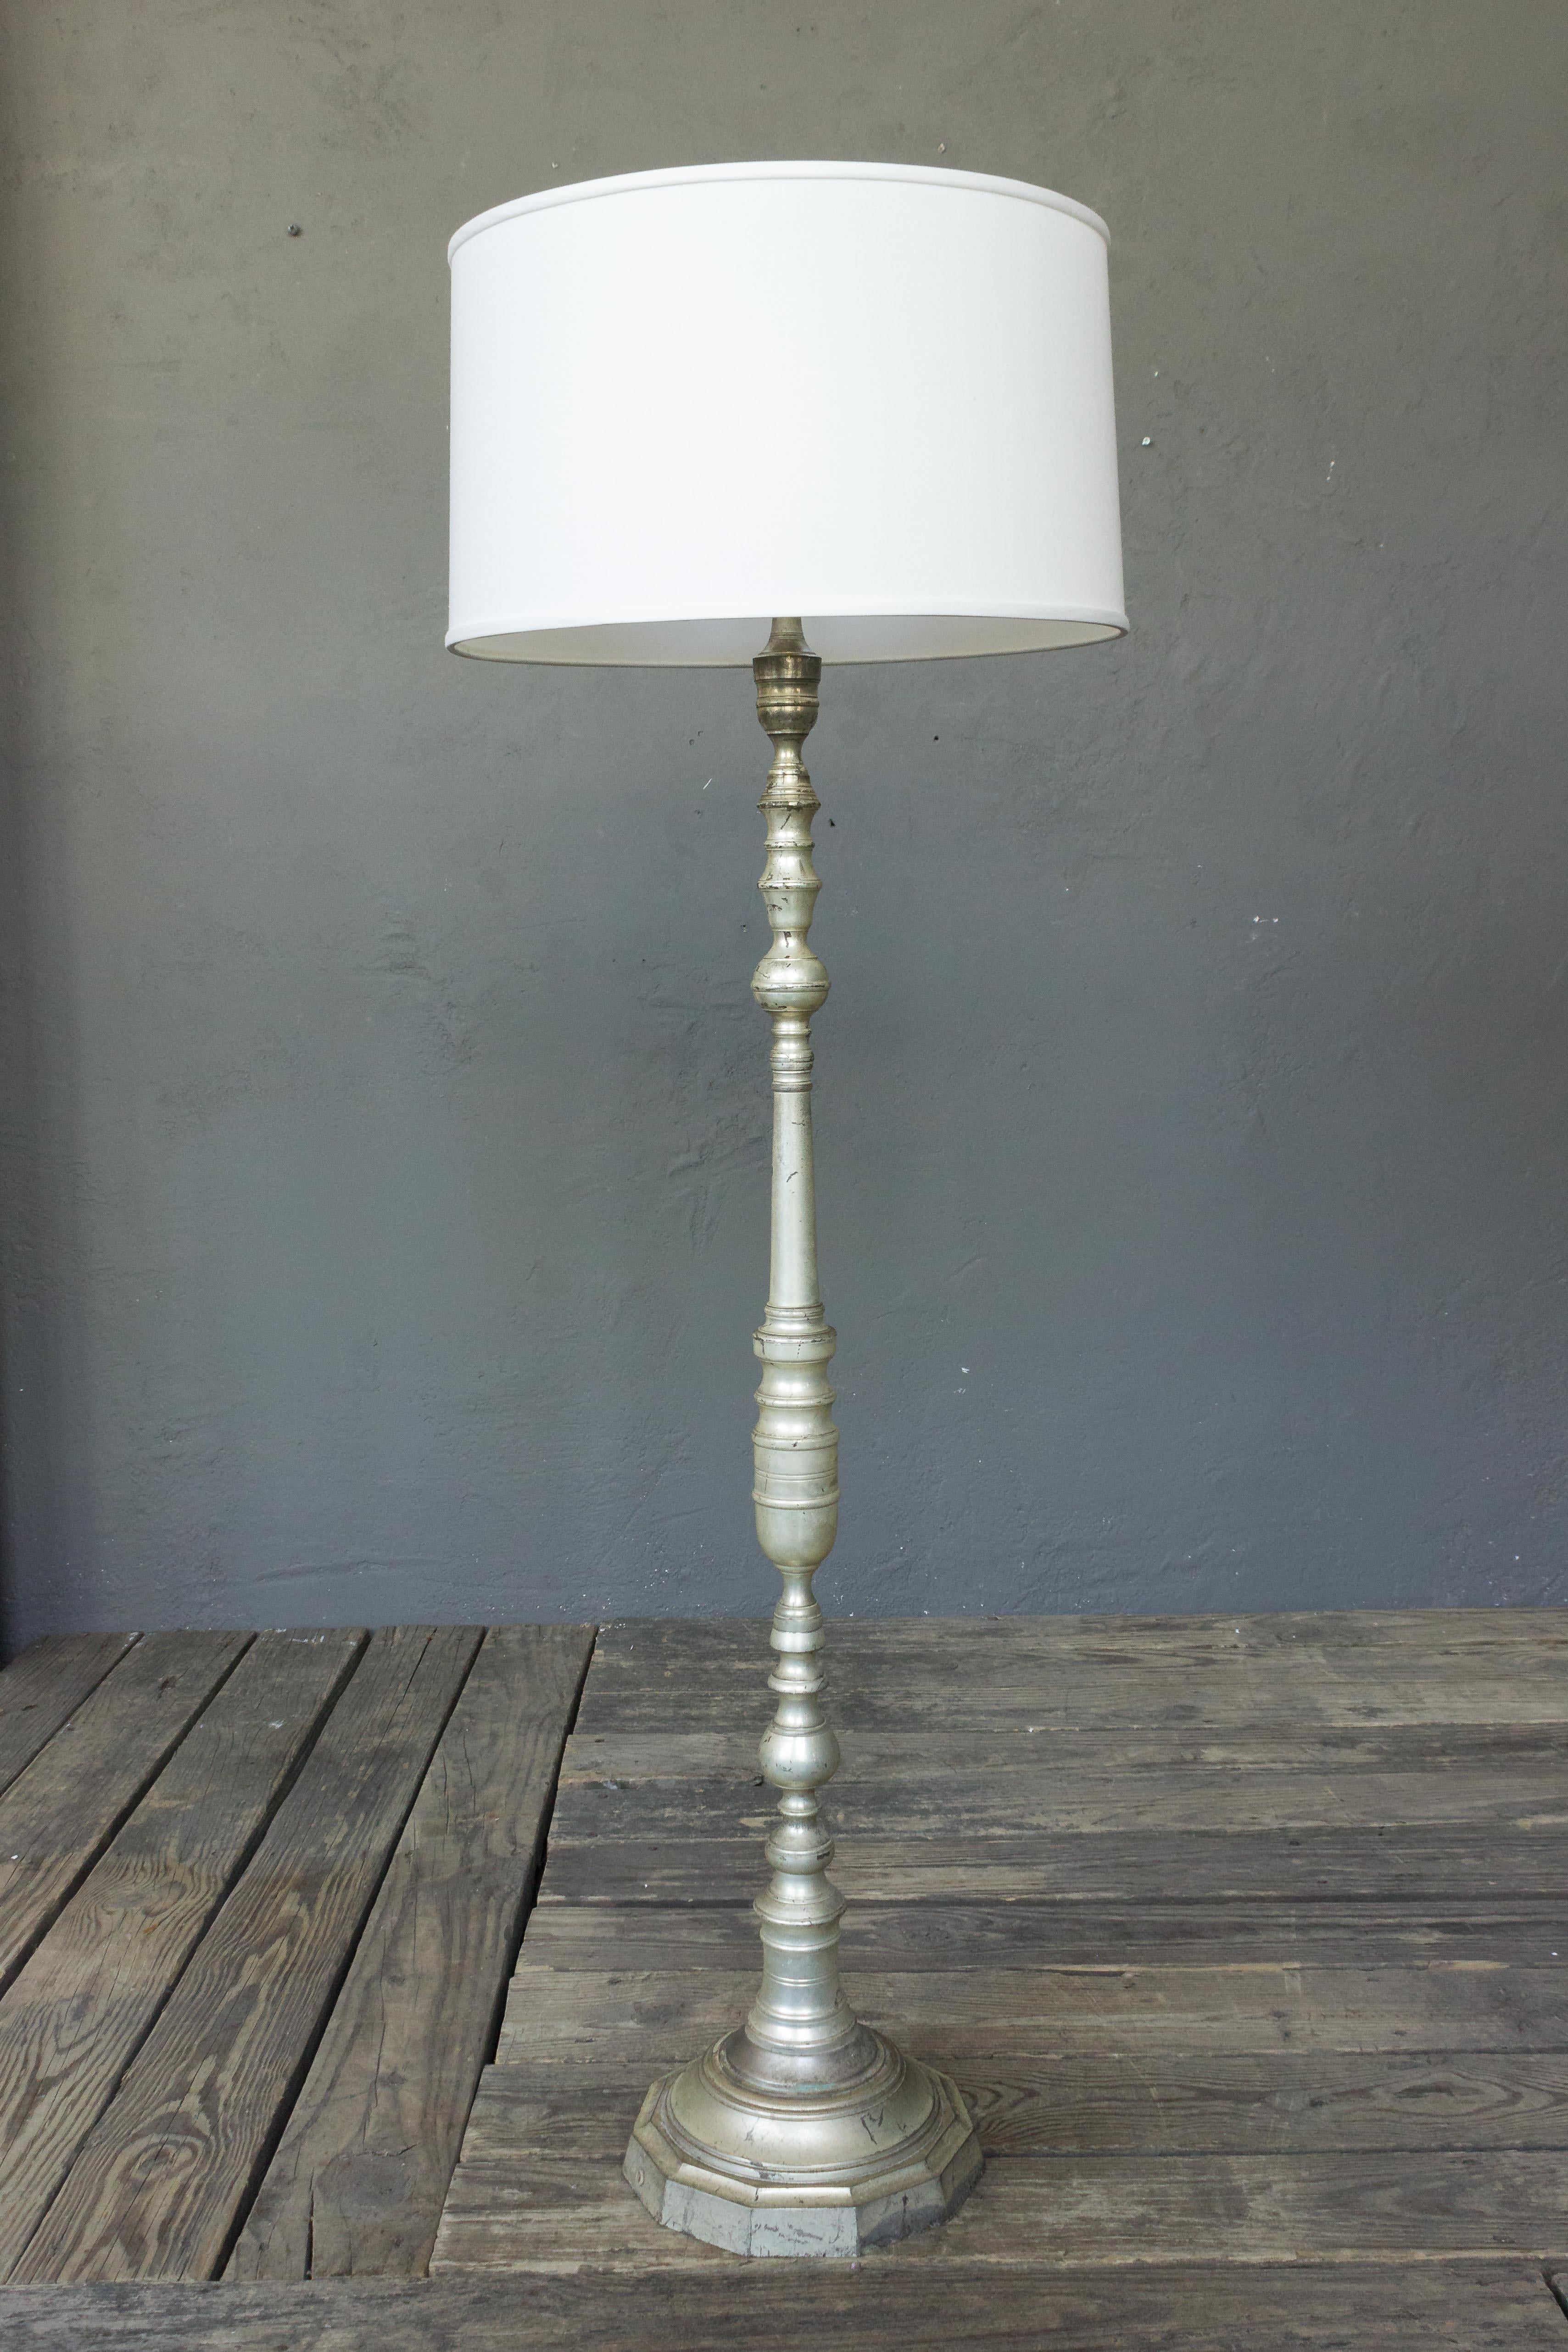 1940s French silvered bronze floor lamp. Price includes hand polishing and new wiring. The plating is original and shows tarnishing and wear. The item is listed in good vintage condition but the plating is not new.

Not sold with shade.

